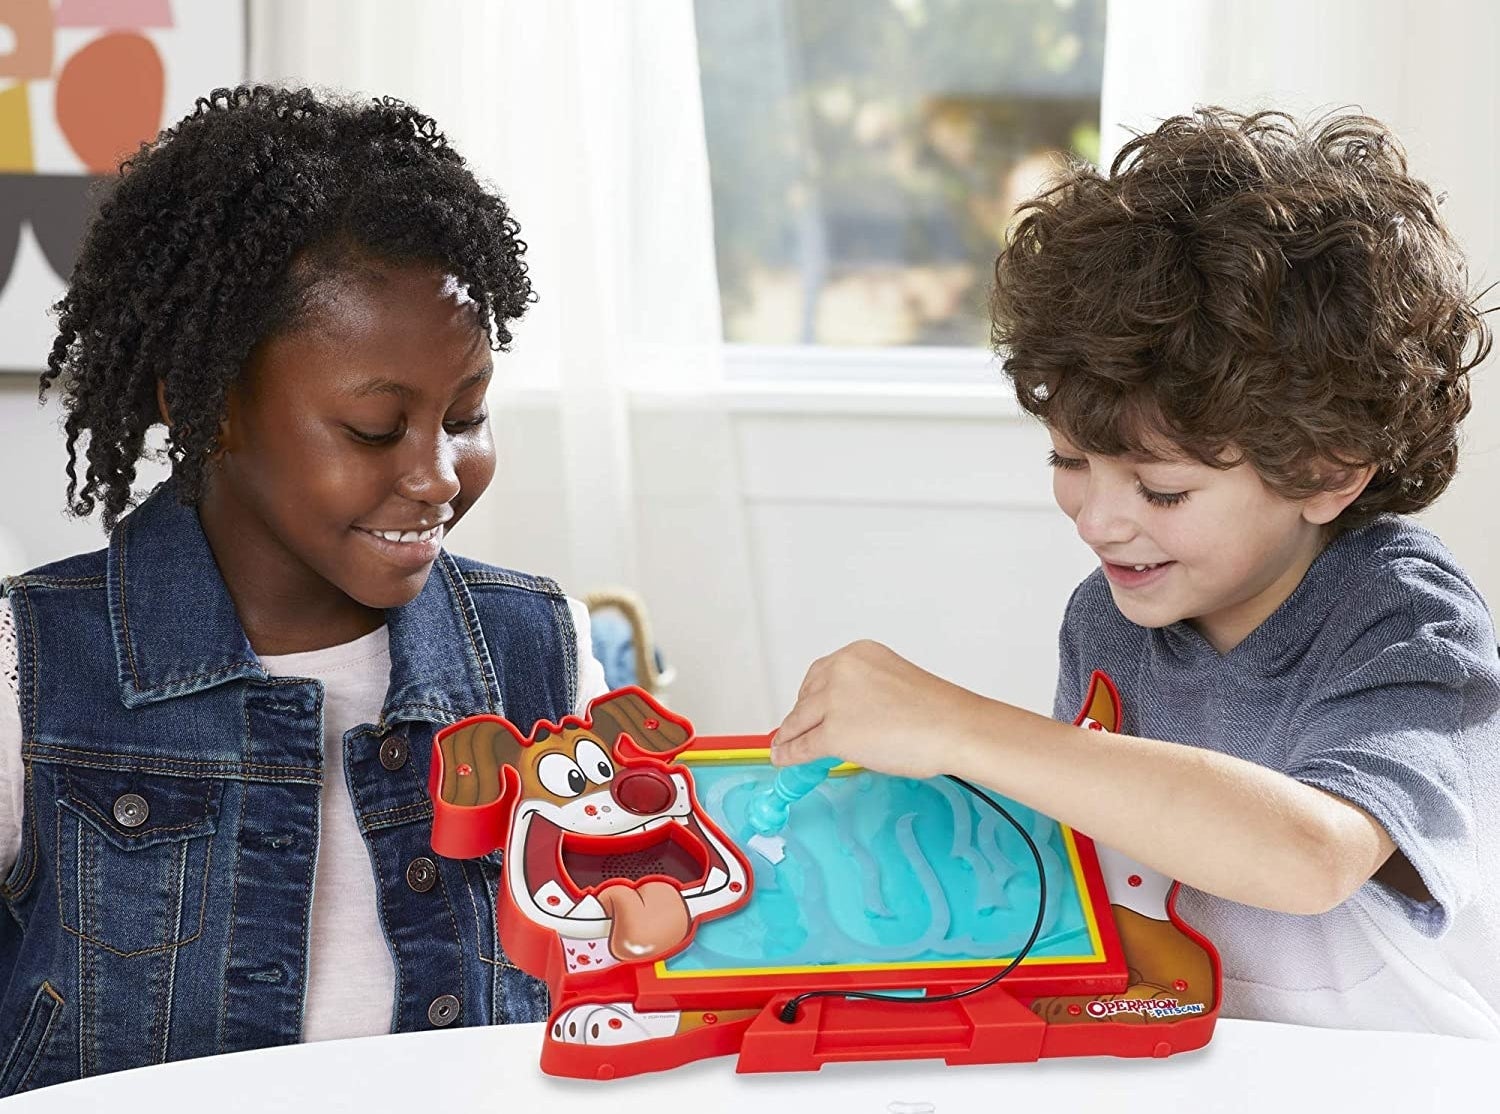 Two child models playing with dog-shaped Operation game